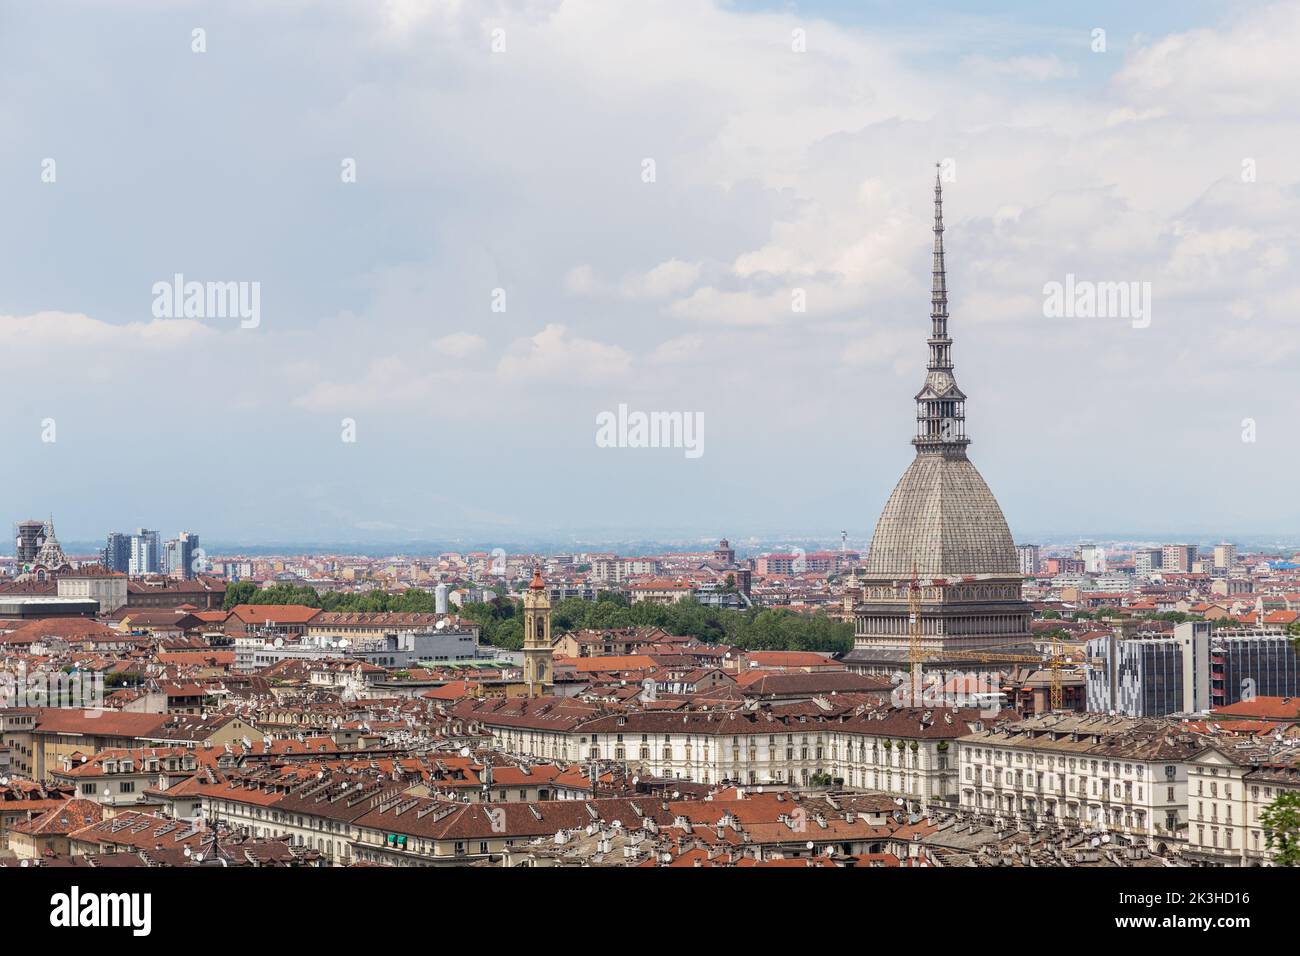 TURIN, ITALY - MAY 16, 2018: This is an aerial view of the city with spire of the Mole Antonelliana. Stock Photo